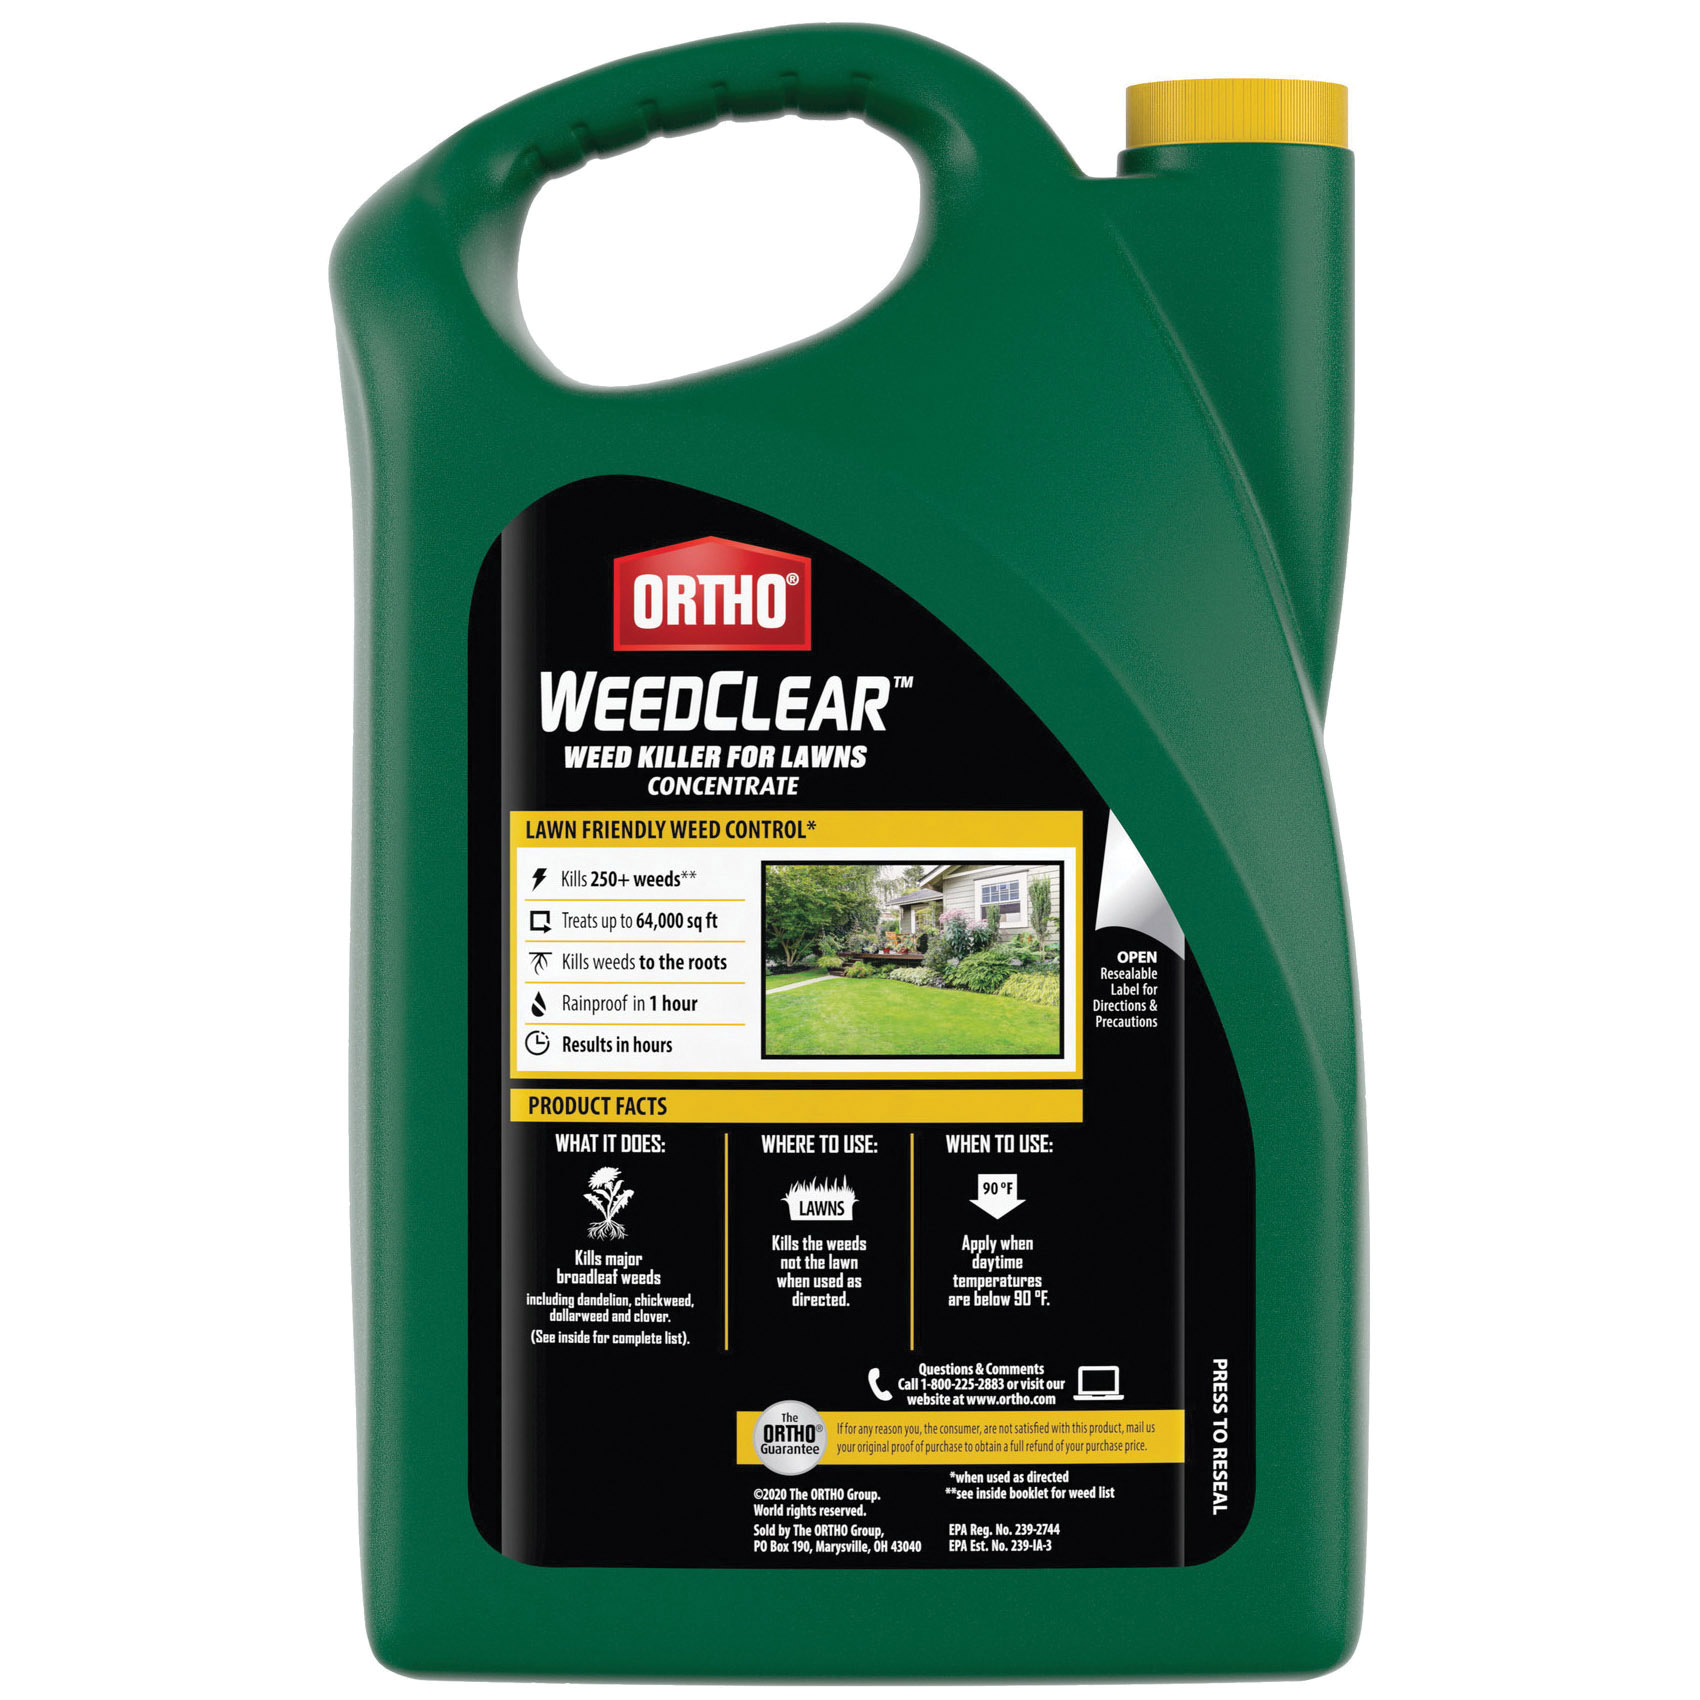 Ortho WeedClear 0204810 Concentrated Lawn Weed Killer, Liquid, Spray Application, 1 gal Bottle - 2